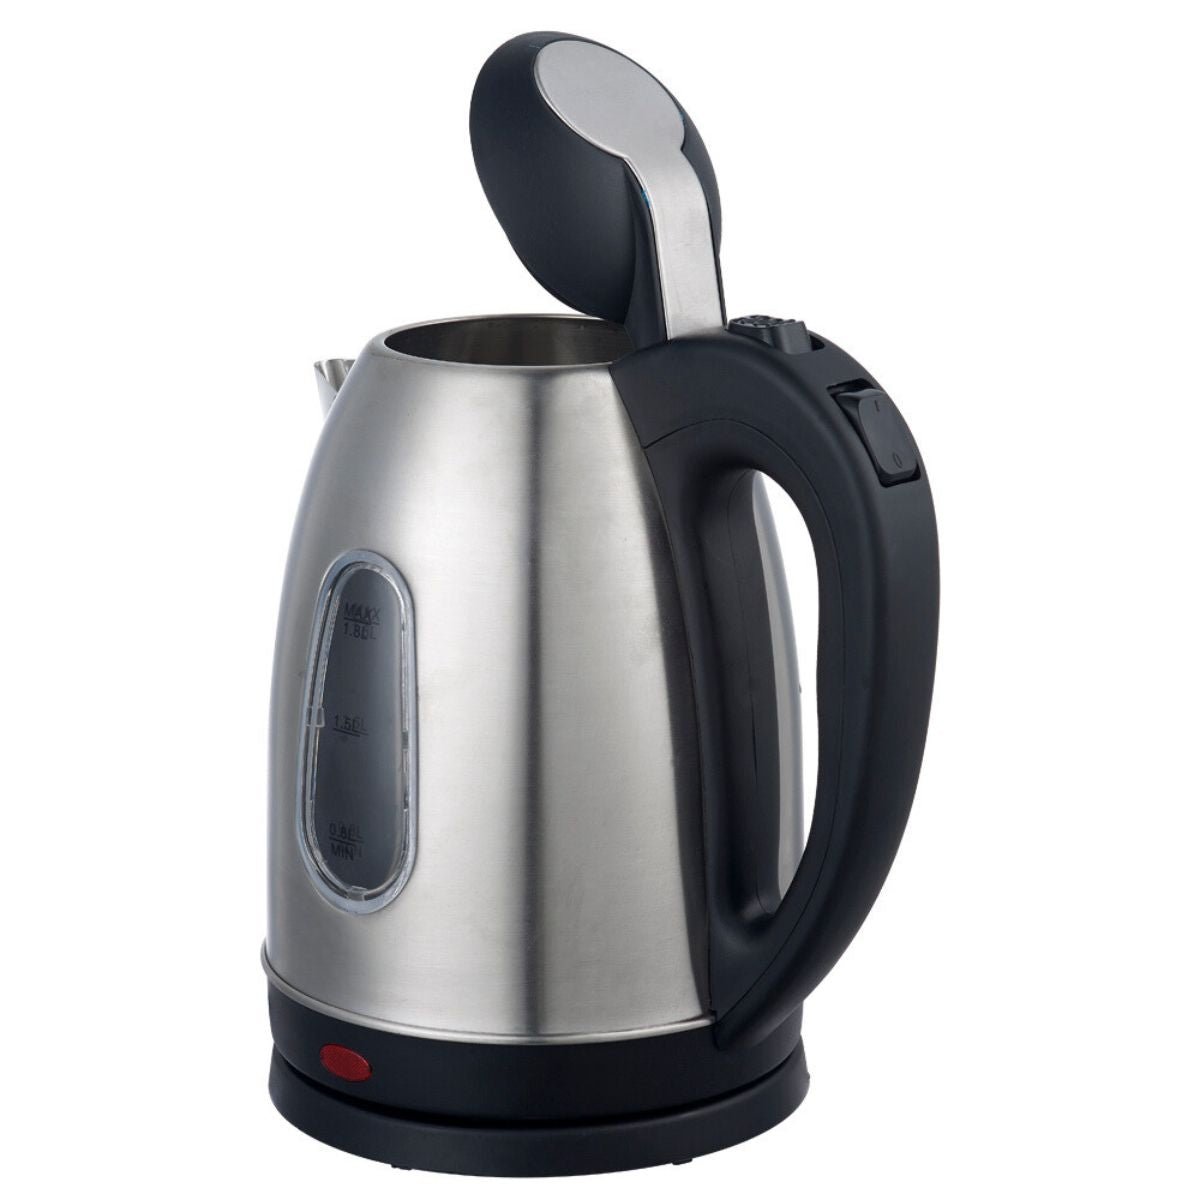 1.8L Stainless Steel Electric Kettle with Water Window - TovaHaus